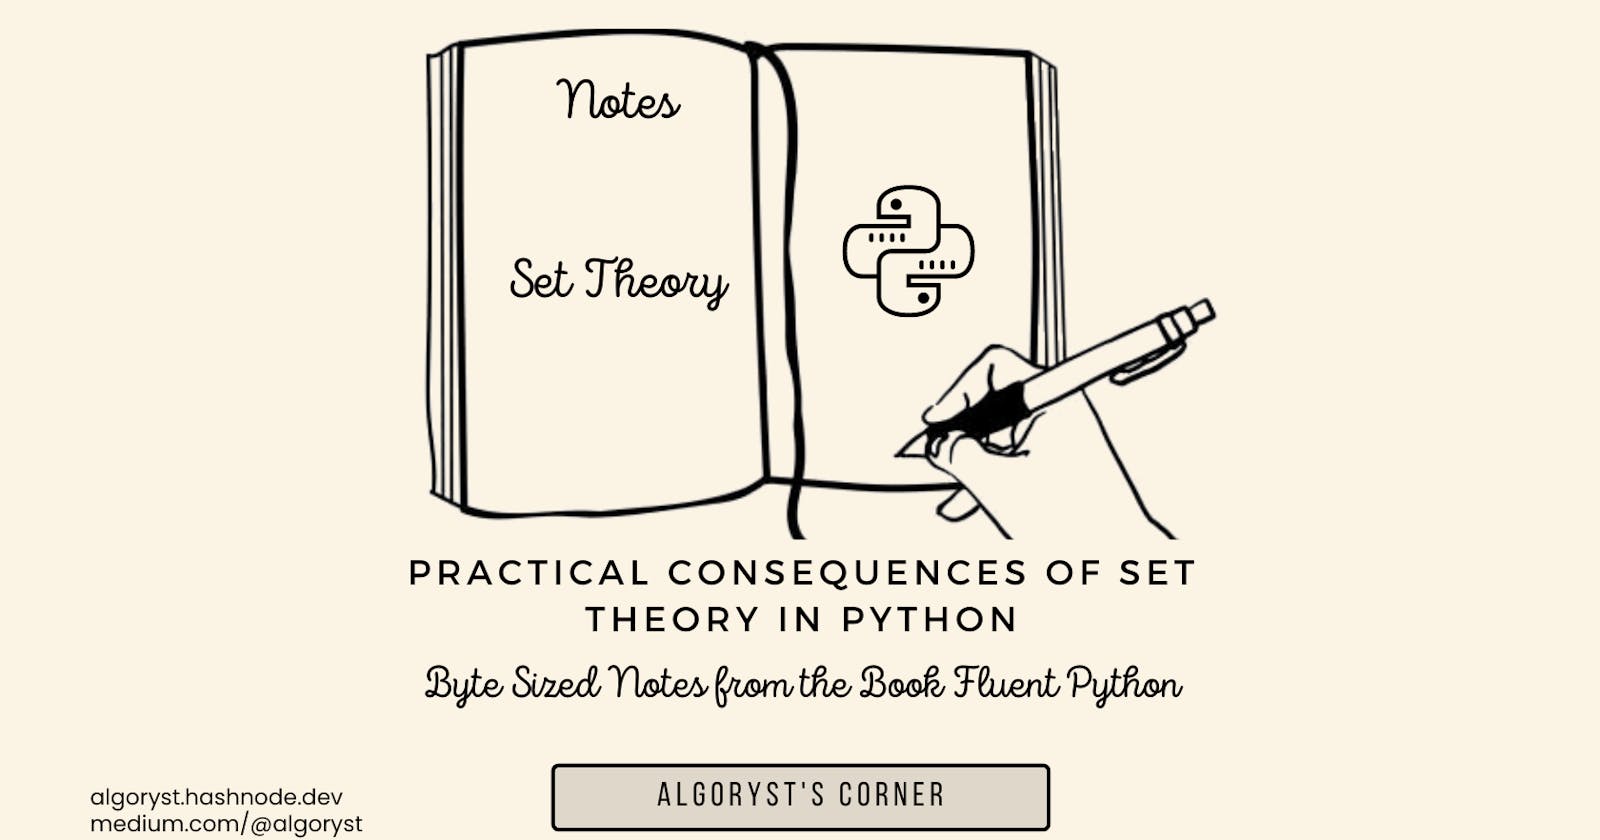 6 Practical Consequences of Set Theory in Python